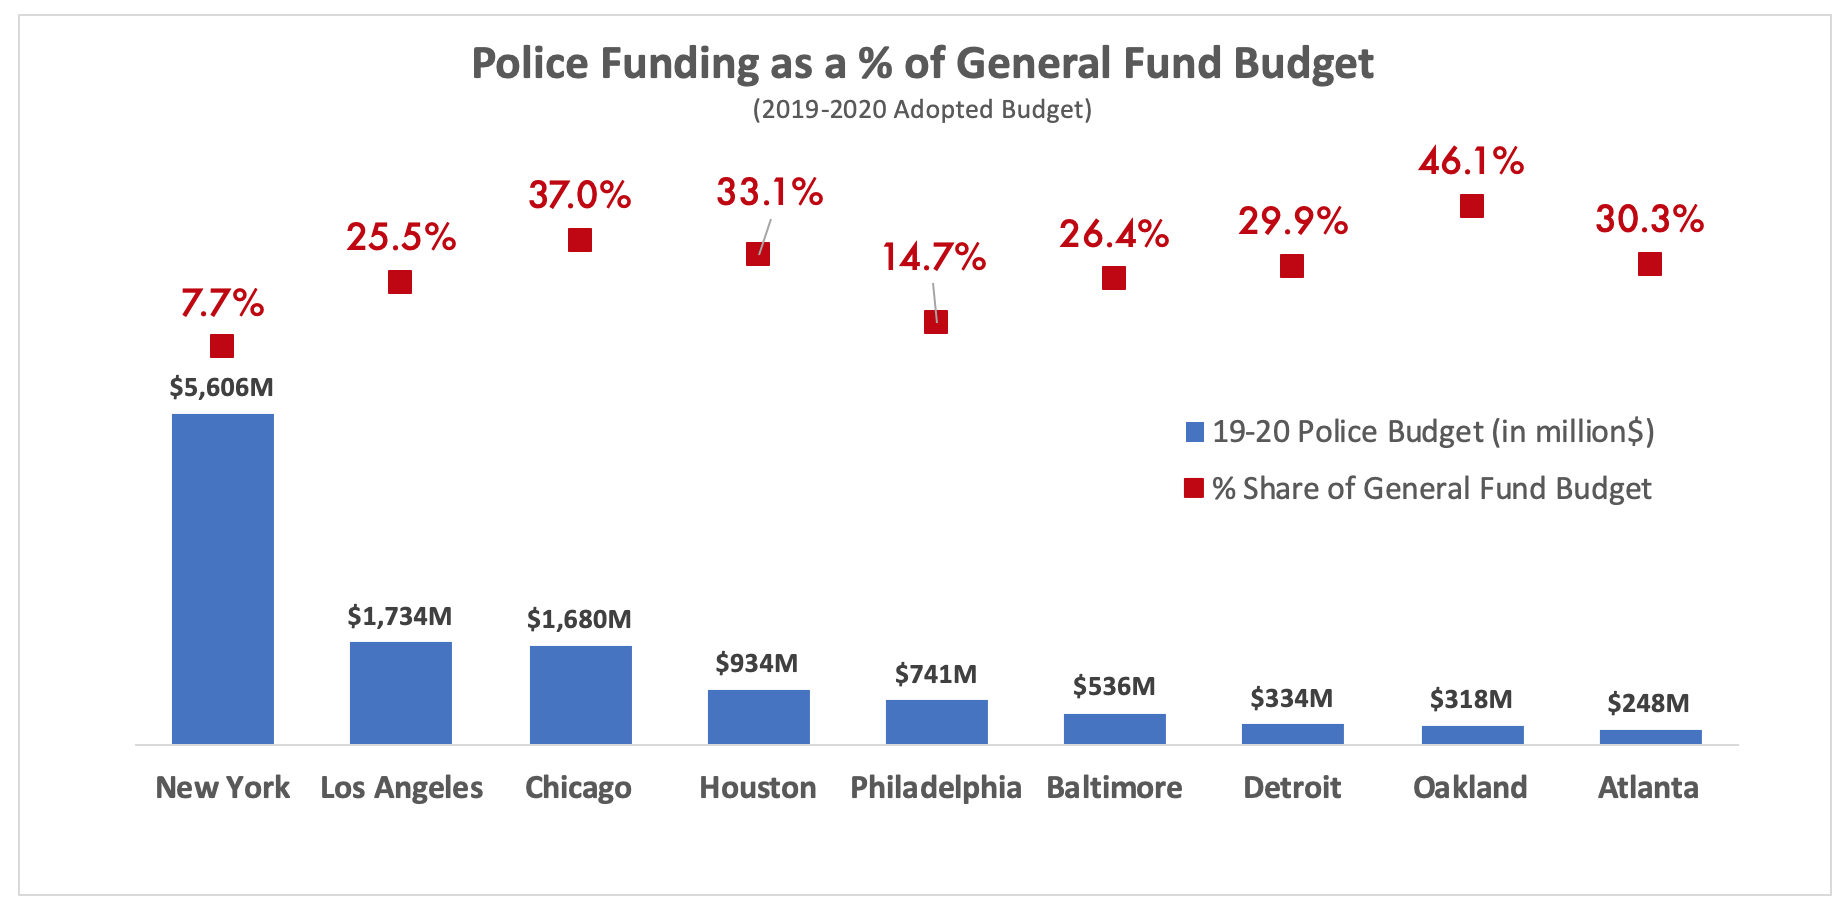  Source: data extracted from city government’s 2019-2020 adopted budgets. Links to each budget are attached at the bottom of this article. 